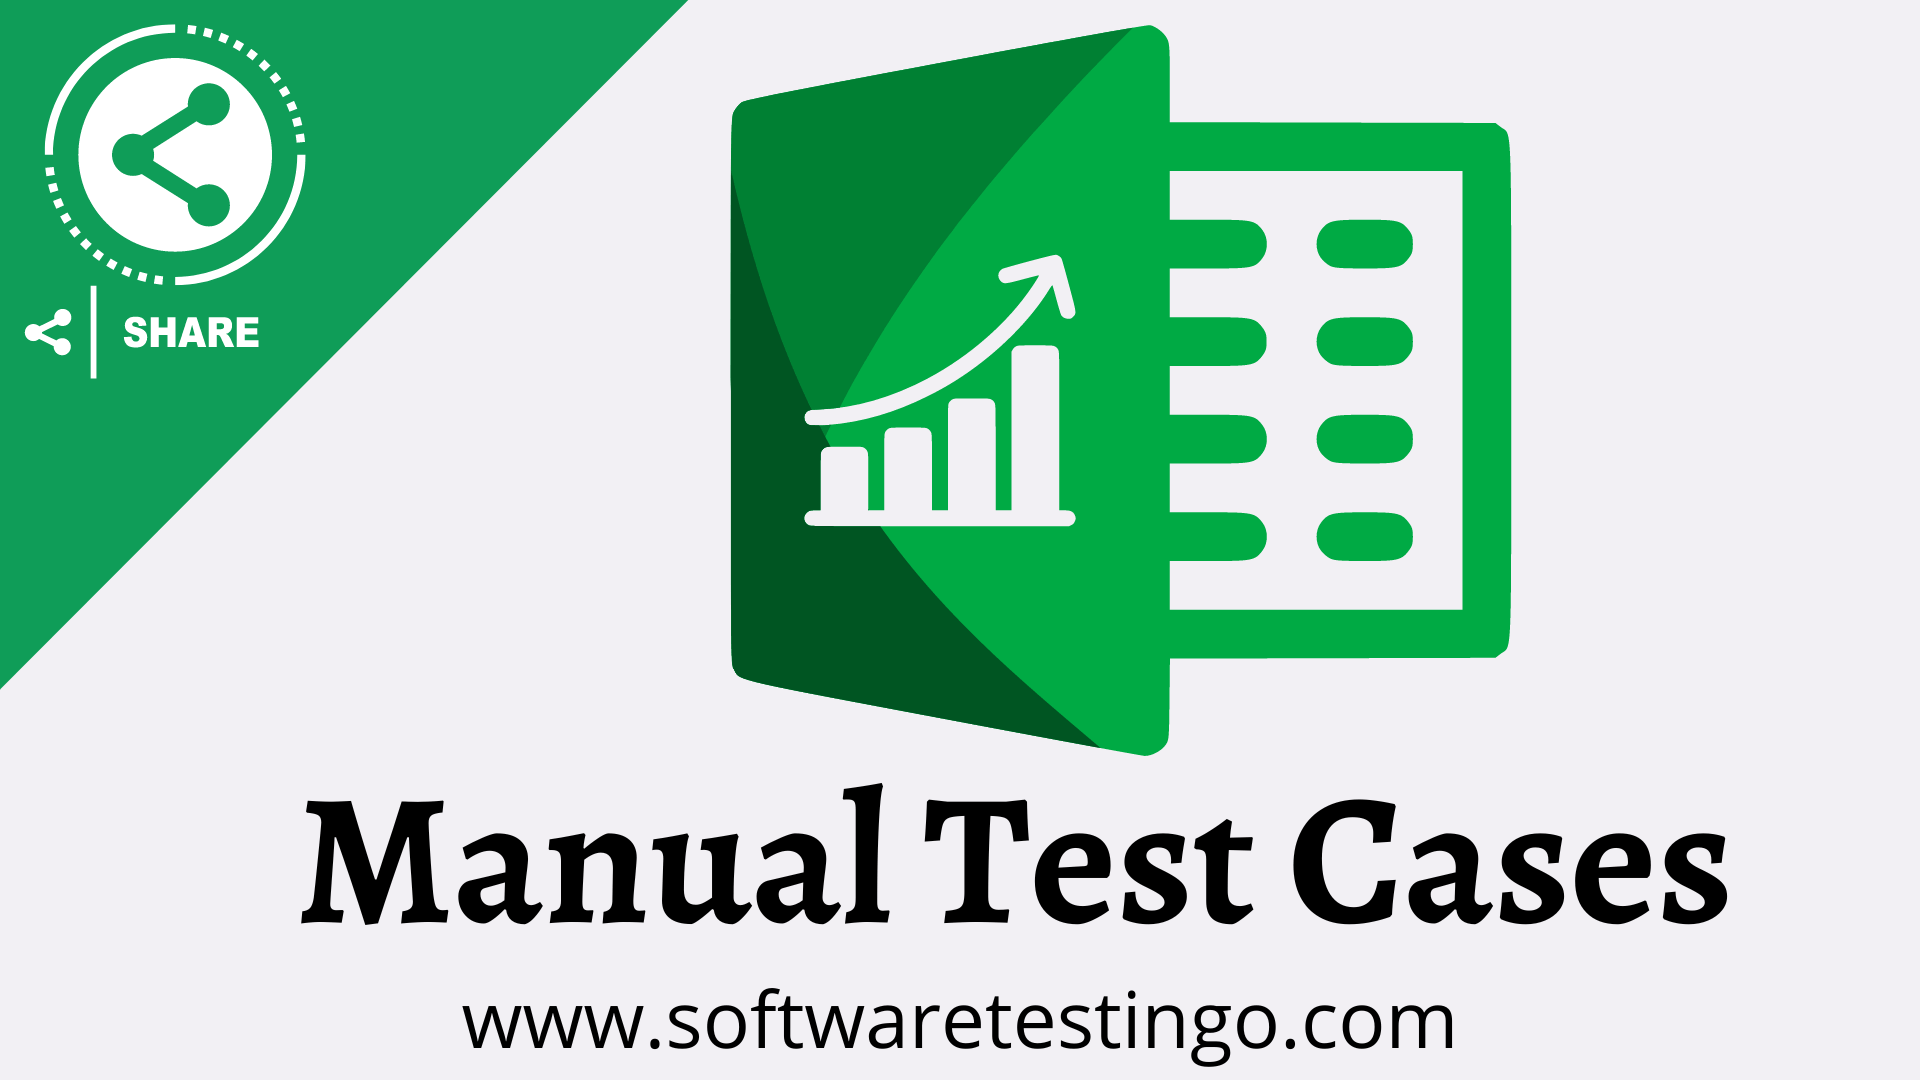 Manual Test Cases